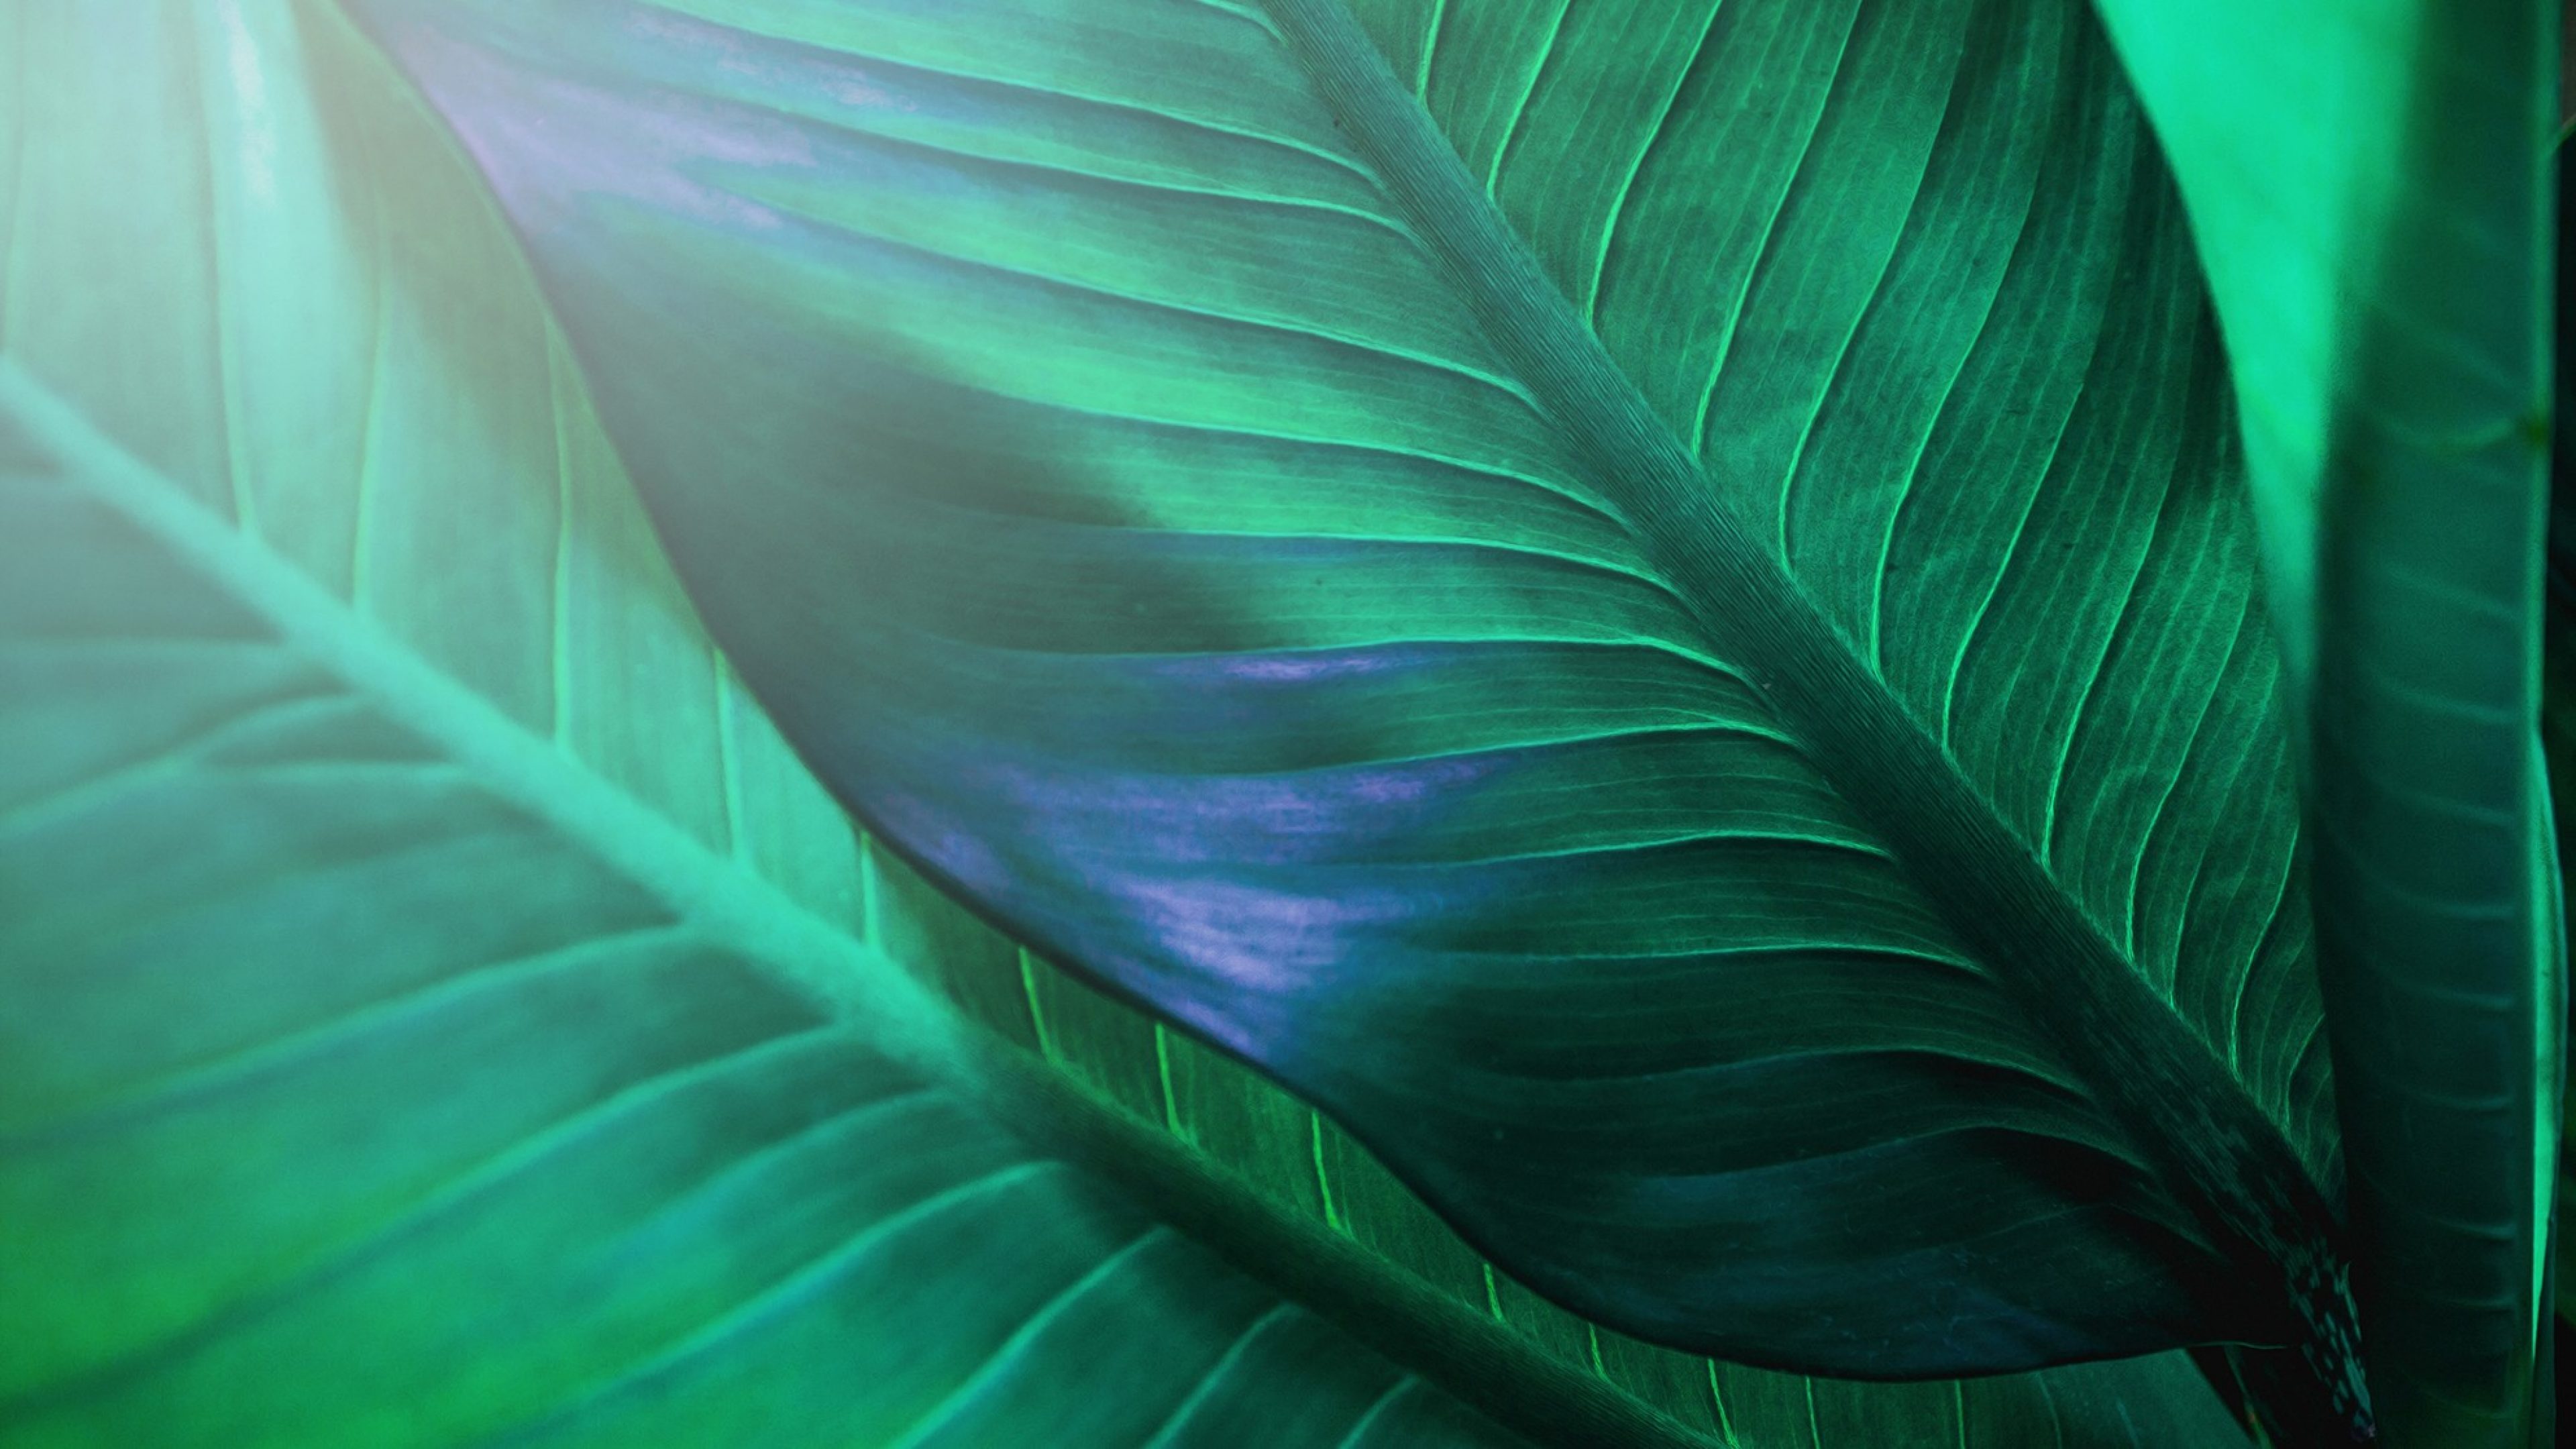 abstract green leaf texture, nature background, tropical leaf; Shutterstock ID 1408079261; purchase_order: Swiss Life Asset Managers France; job: Swiss Life Asset Managers France; client: Swiss Life Asset Managers France; other: Swiss Life Asset Managers France